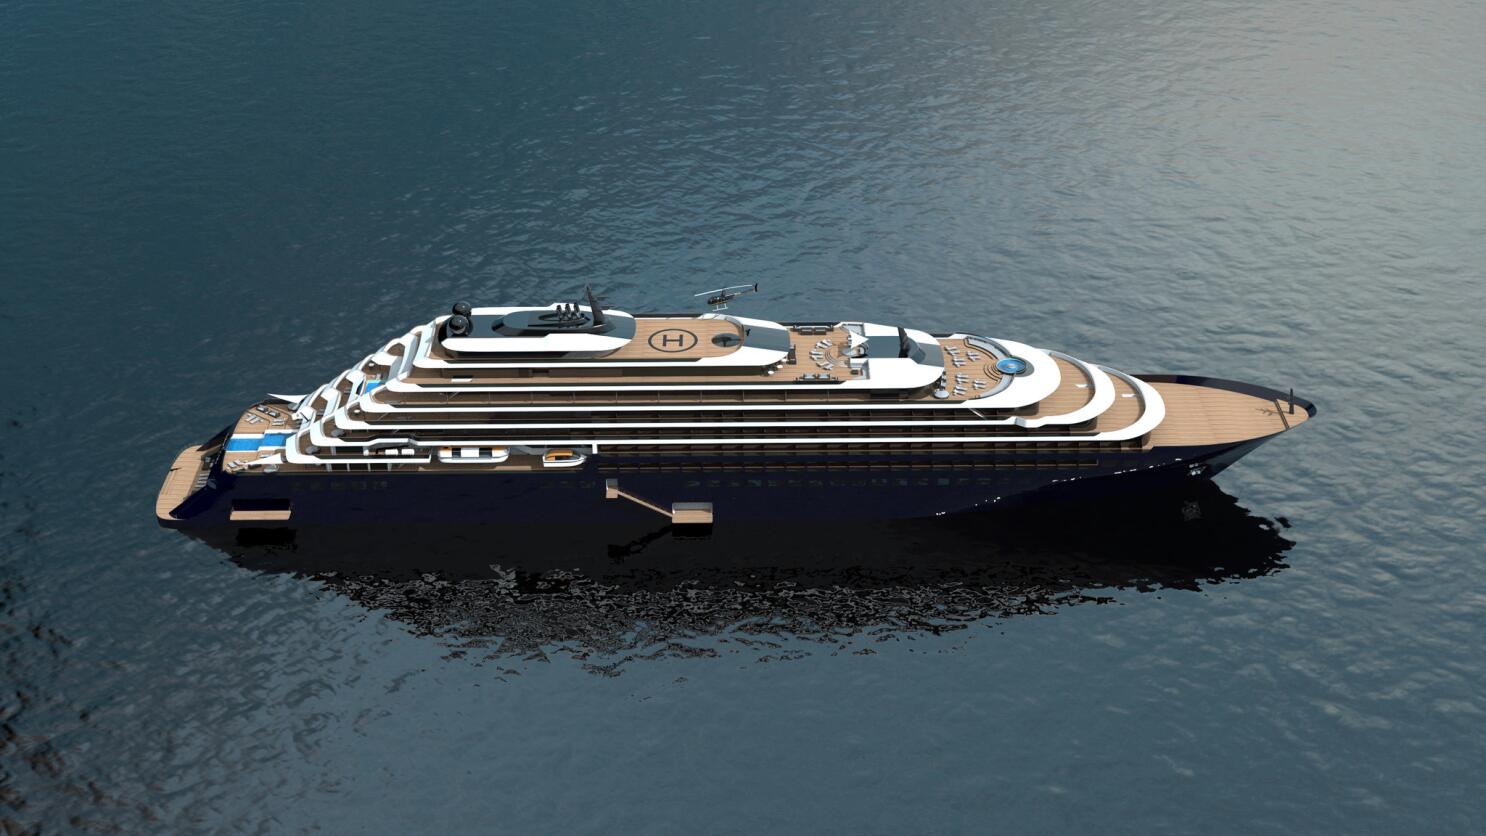 Could the new Ritz-Carlton yacht be a cruise for non-cruisers